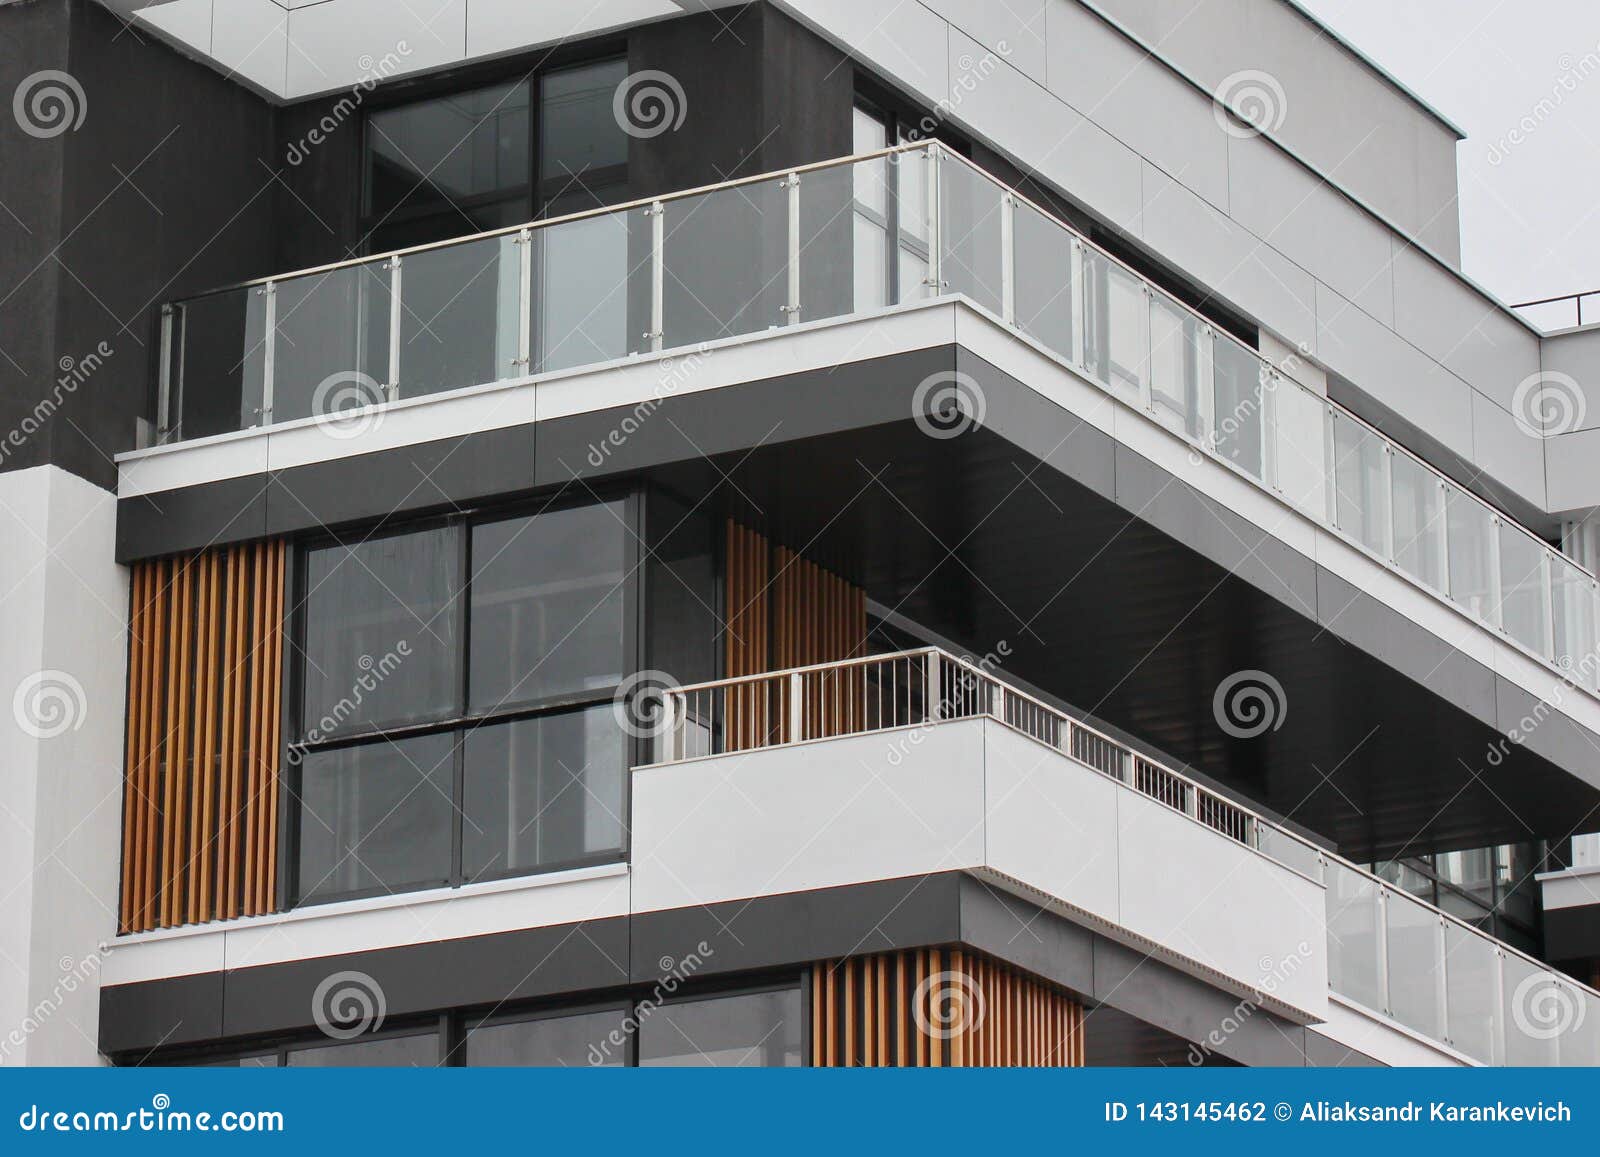 Construction of modern residential buildings. the combination of different materials and textures in the design. convenient layout. Construction of modern residential buildings. combination of different materials and textures in the design. convenient layout of apartments and houses. low-rise buildings. glass, wood, metal and concrete are stylish solutions